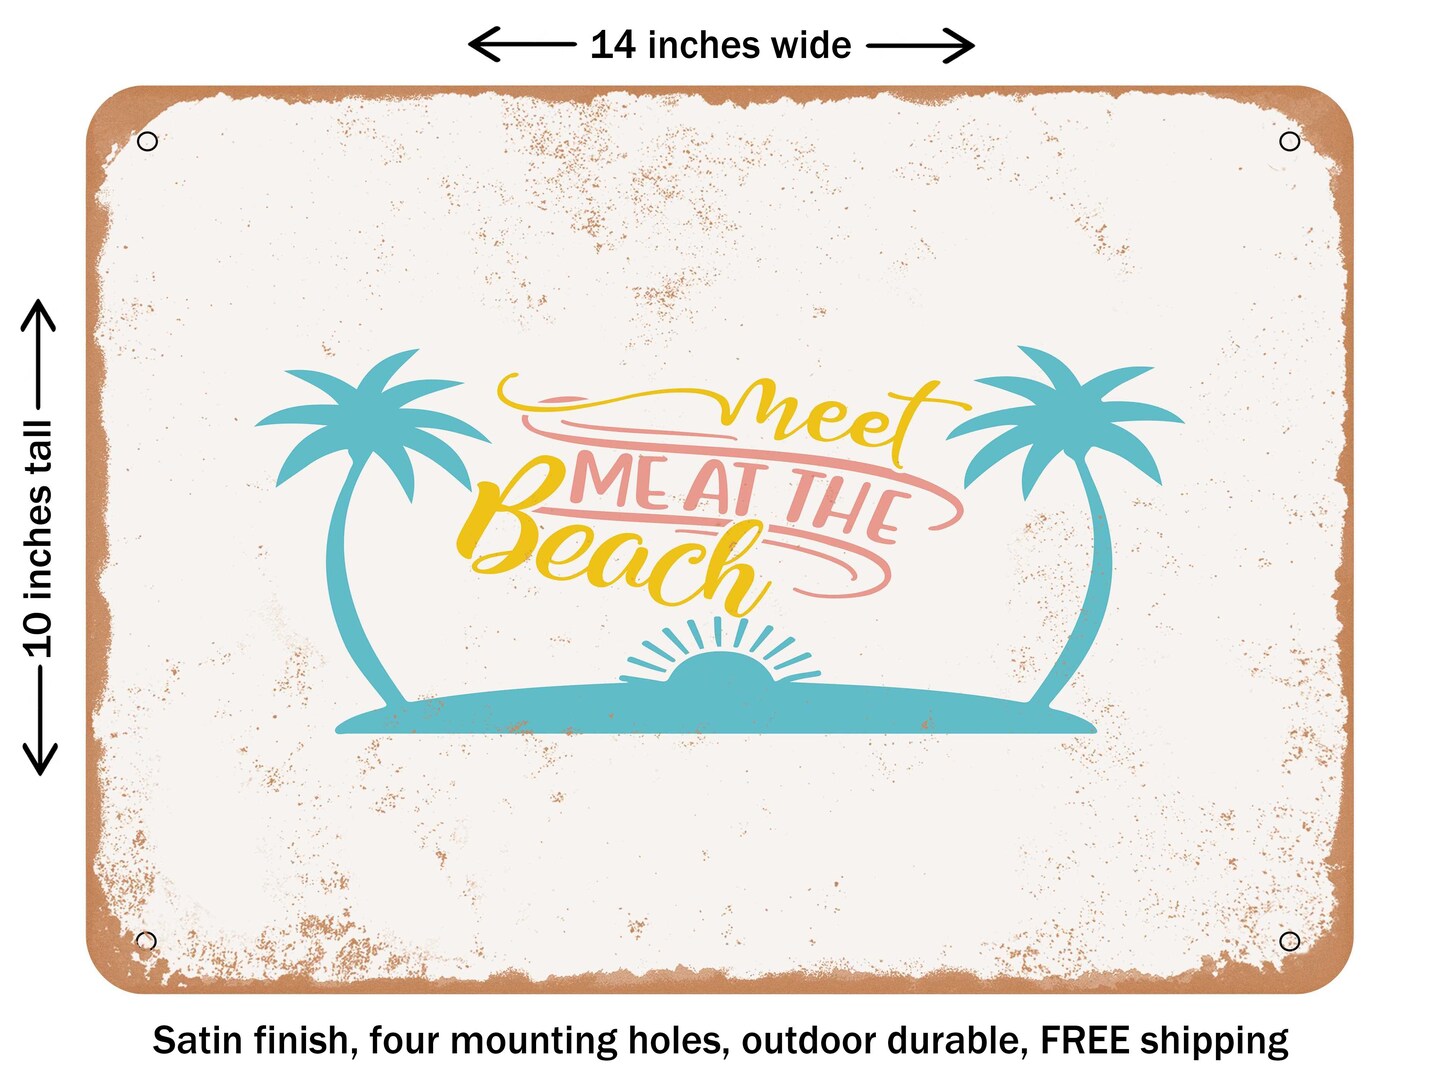 DECORATIVE METAL SIGN - Meet Me At the Beach - 3 - Vintage Rusty Look